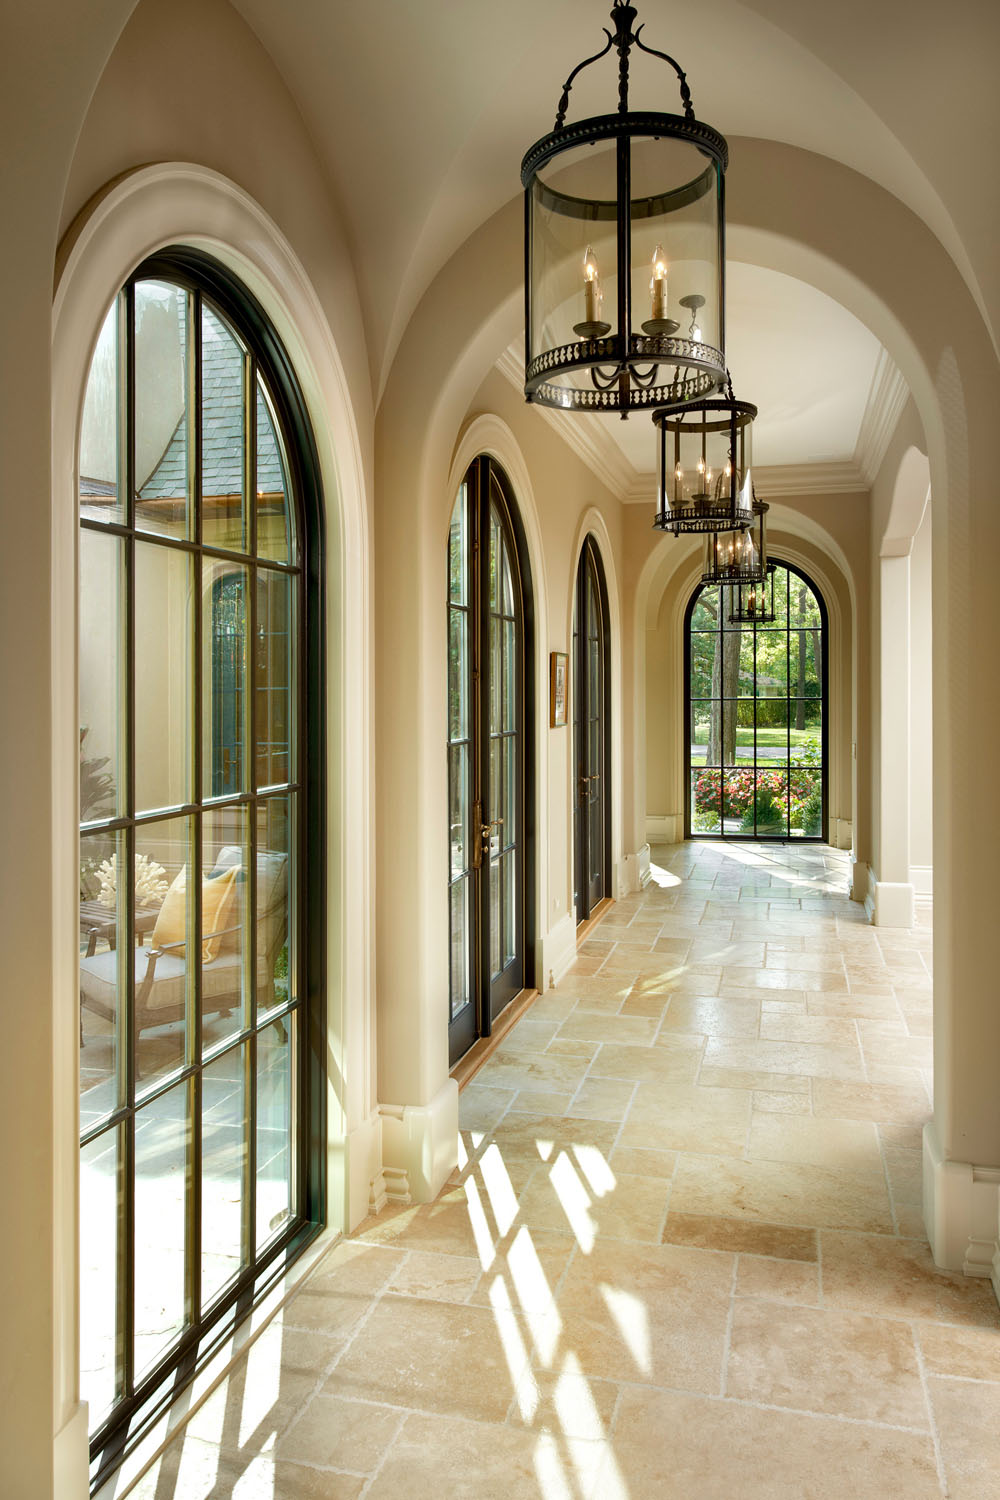 Hallway with Gothic Groin-Vaulted Ceilings